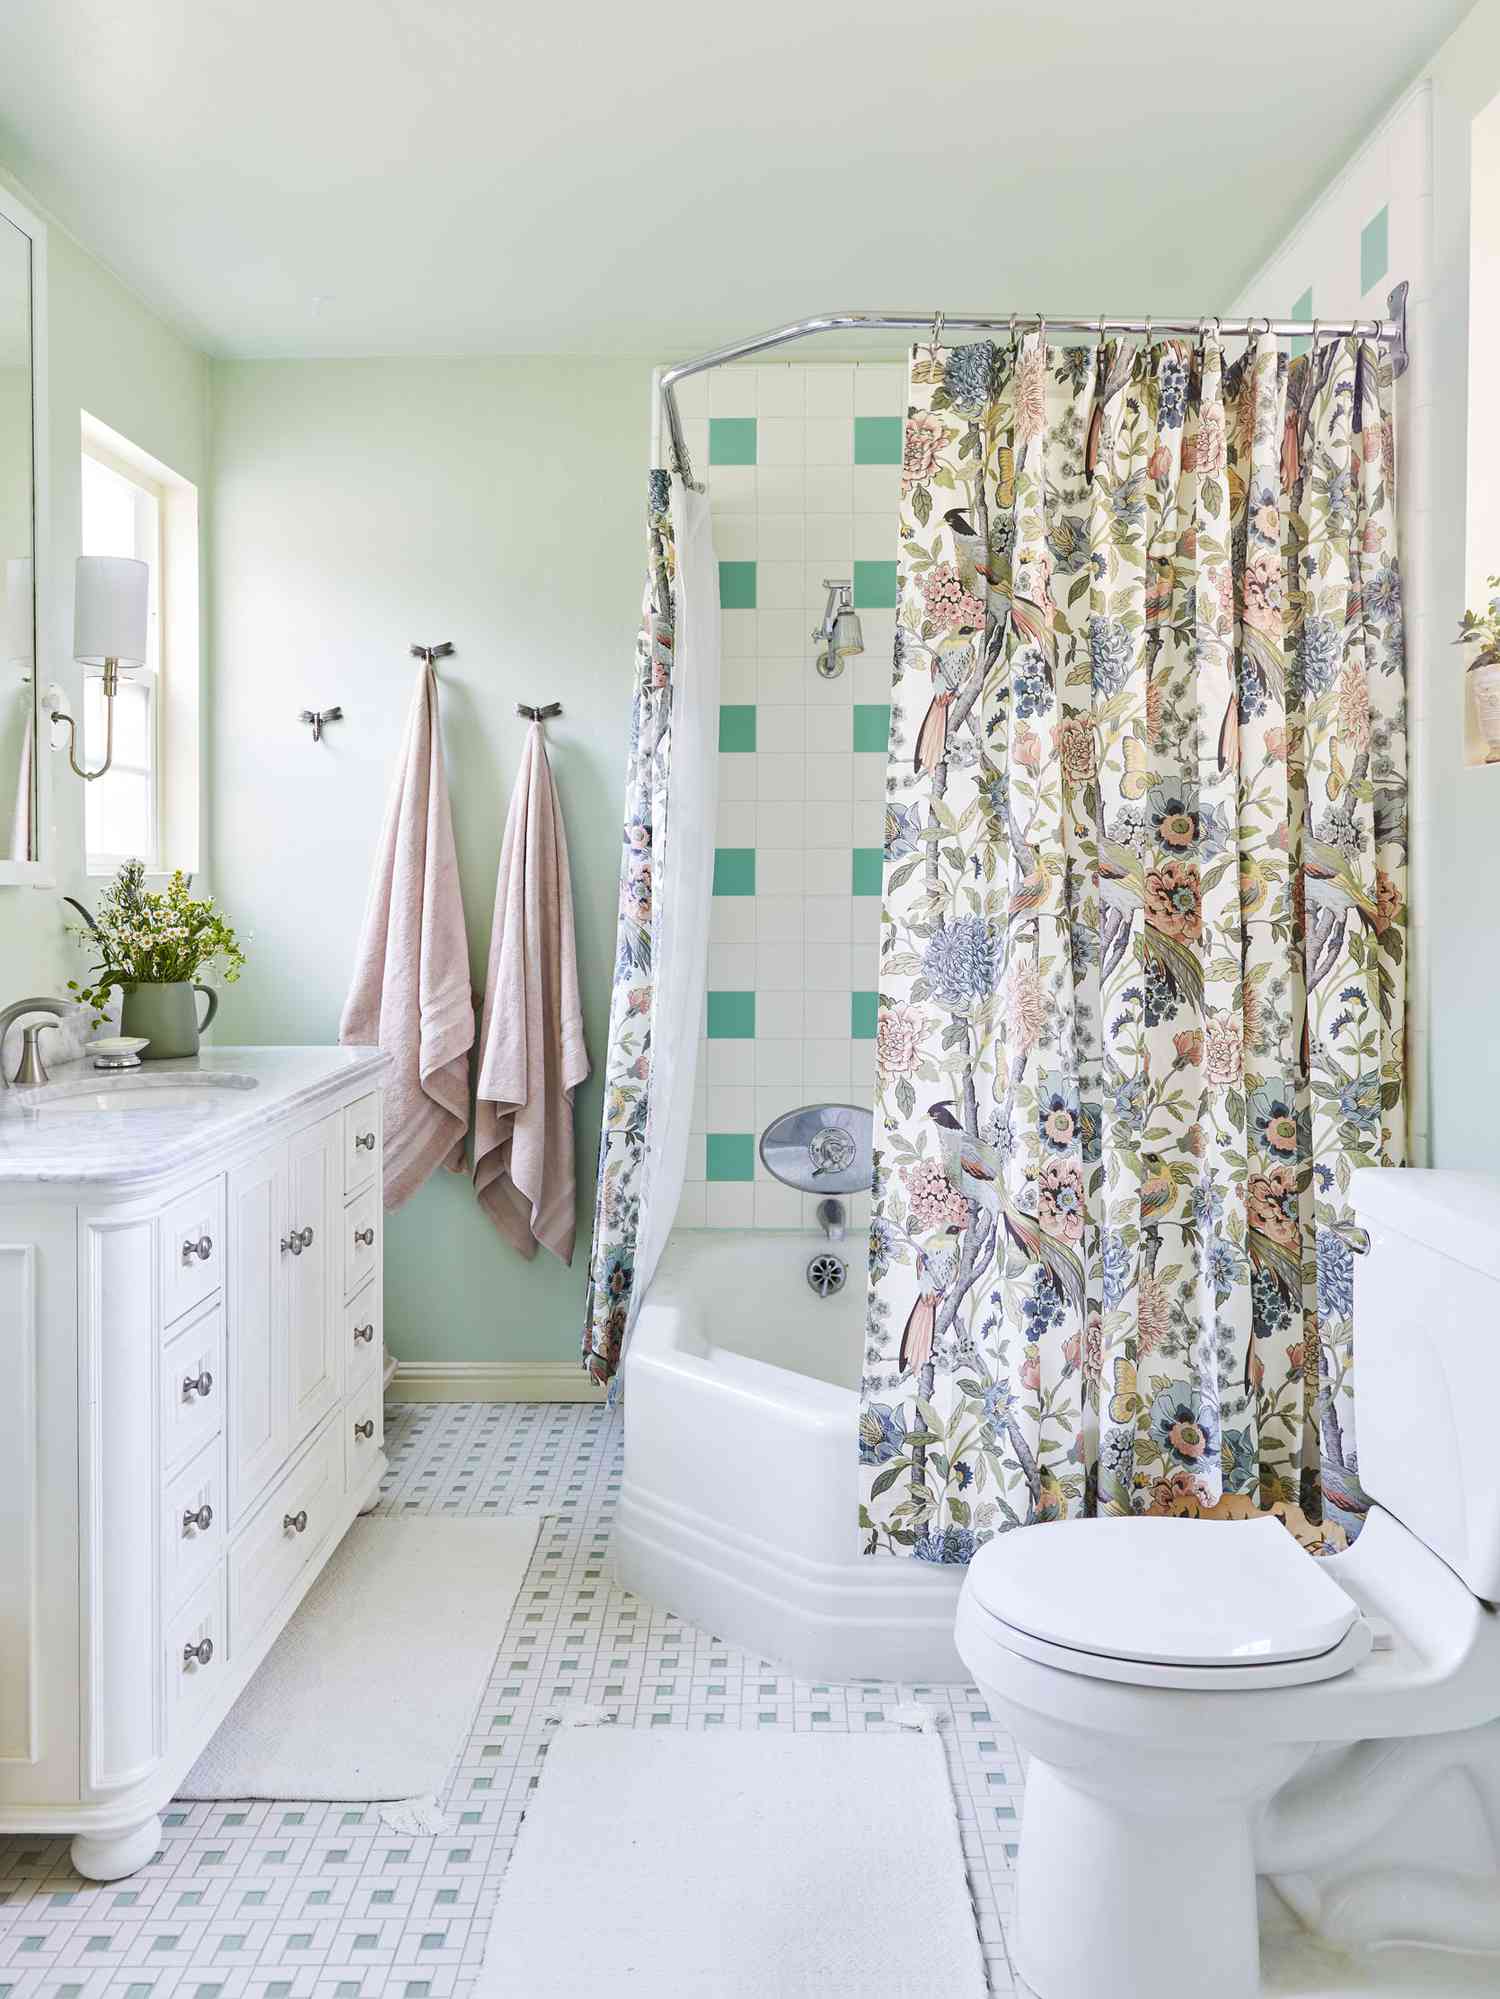 Colorful shower curtain in floral patterns is pared with walls painted in muted green tones